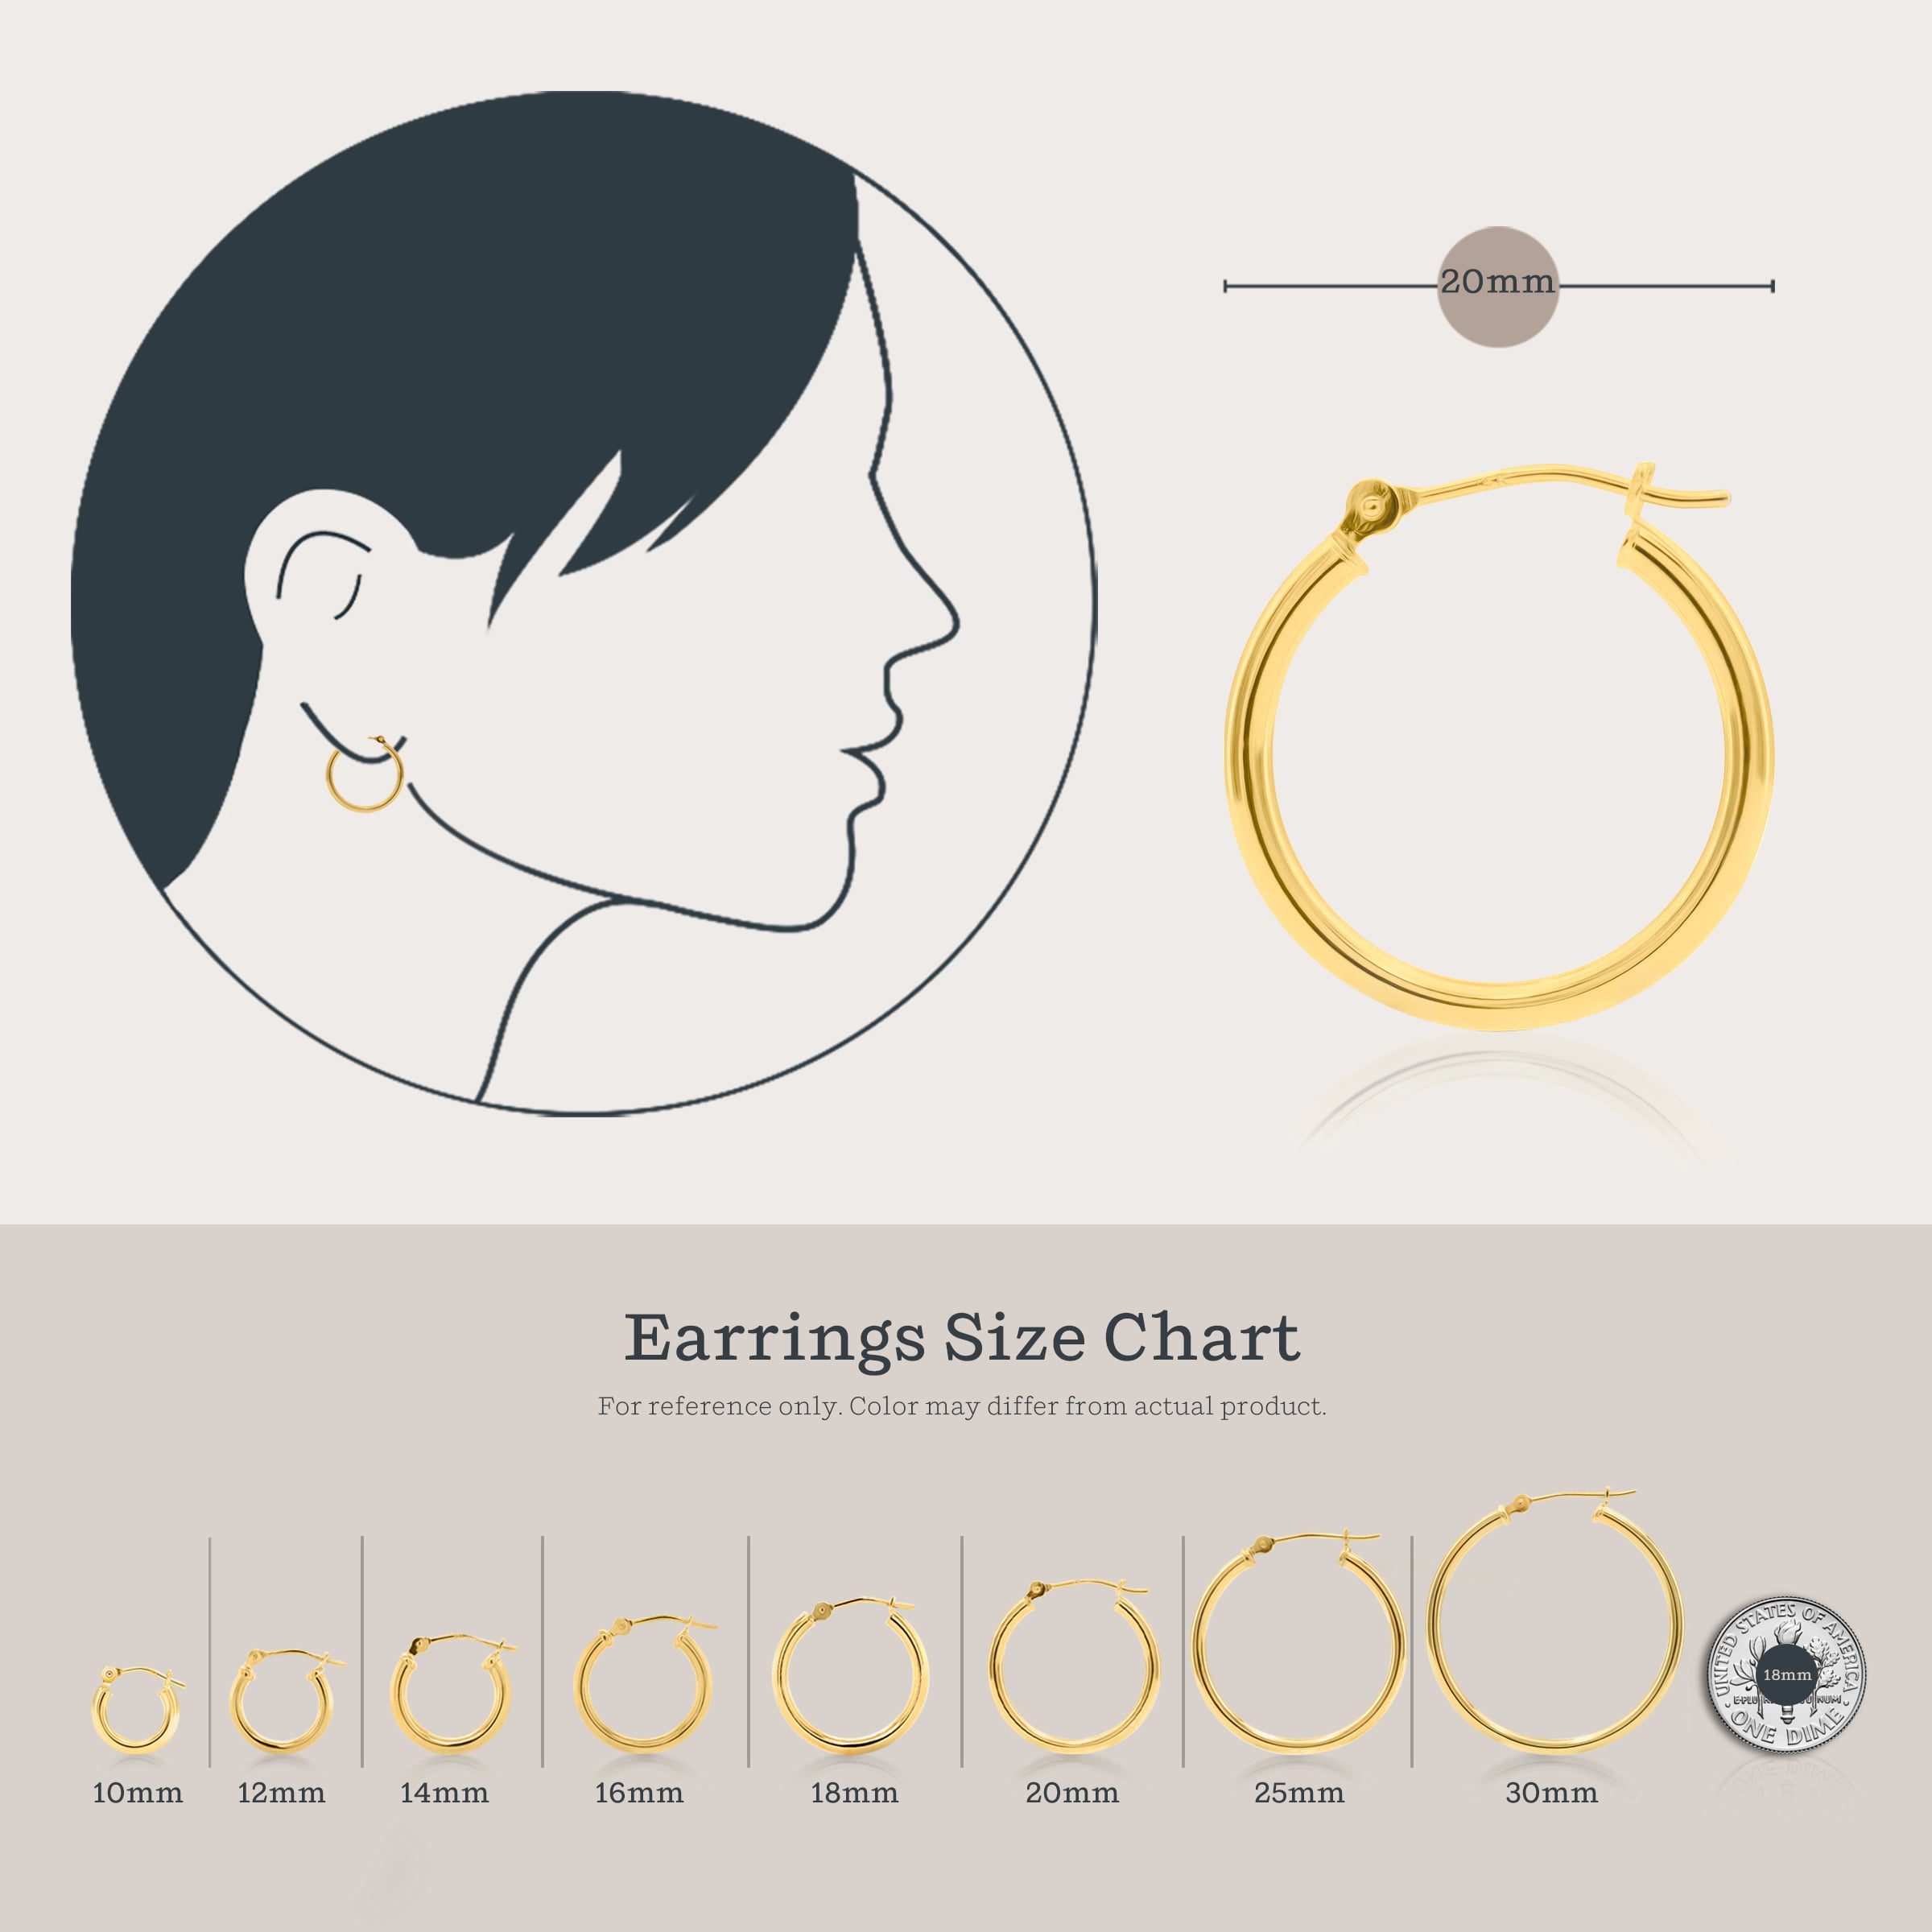 ERG-1739-G/2PCS/Hammered L Shape Earring /19mm x 32mm/Gold Plated Over Brass/Stainless Post